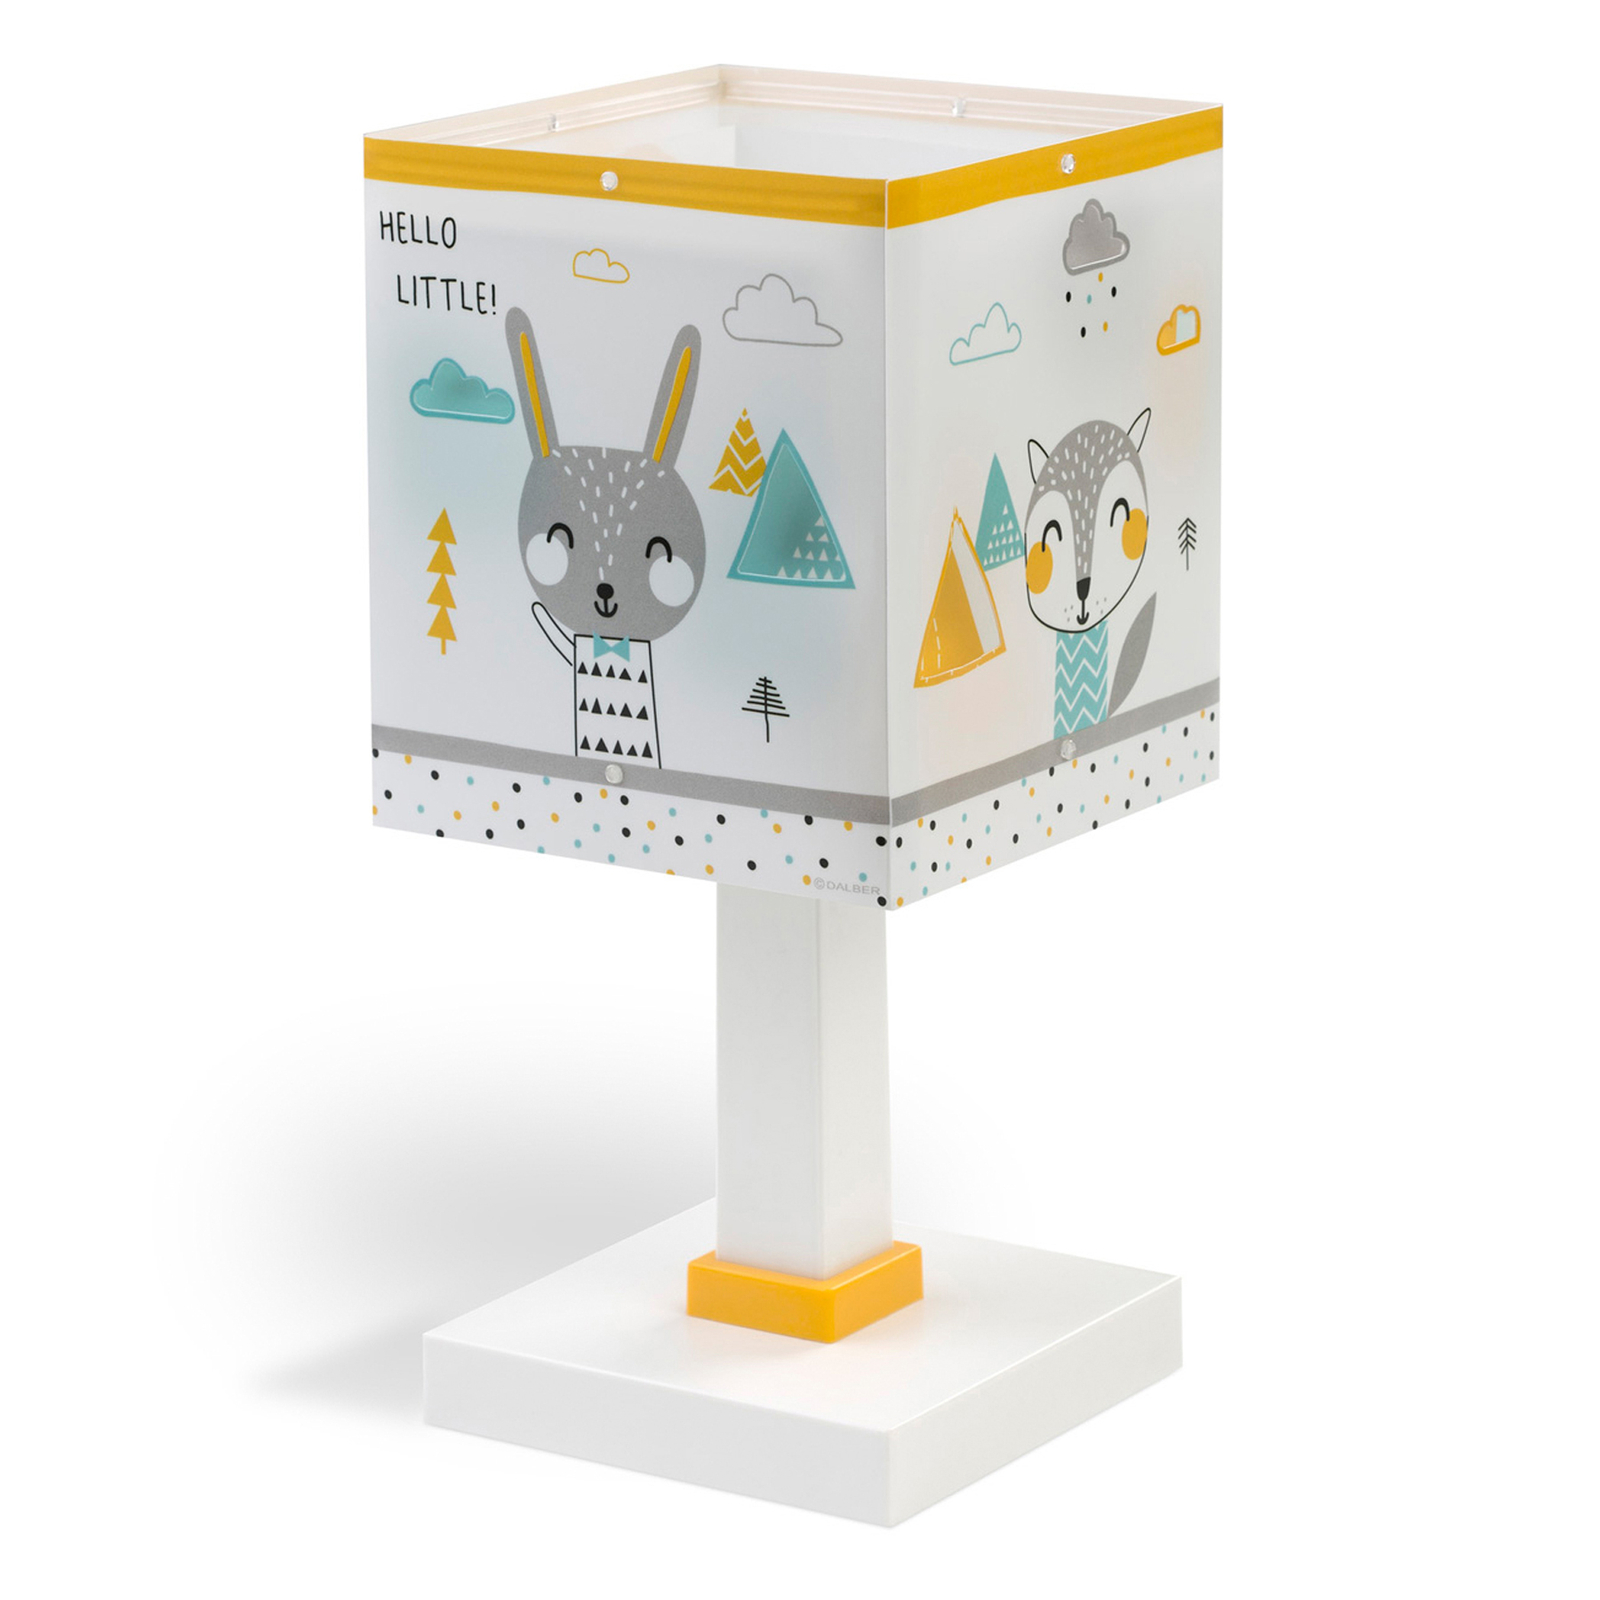 Dalber Hello Little table lamp for a child’s room